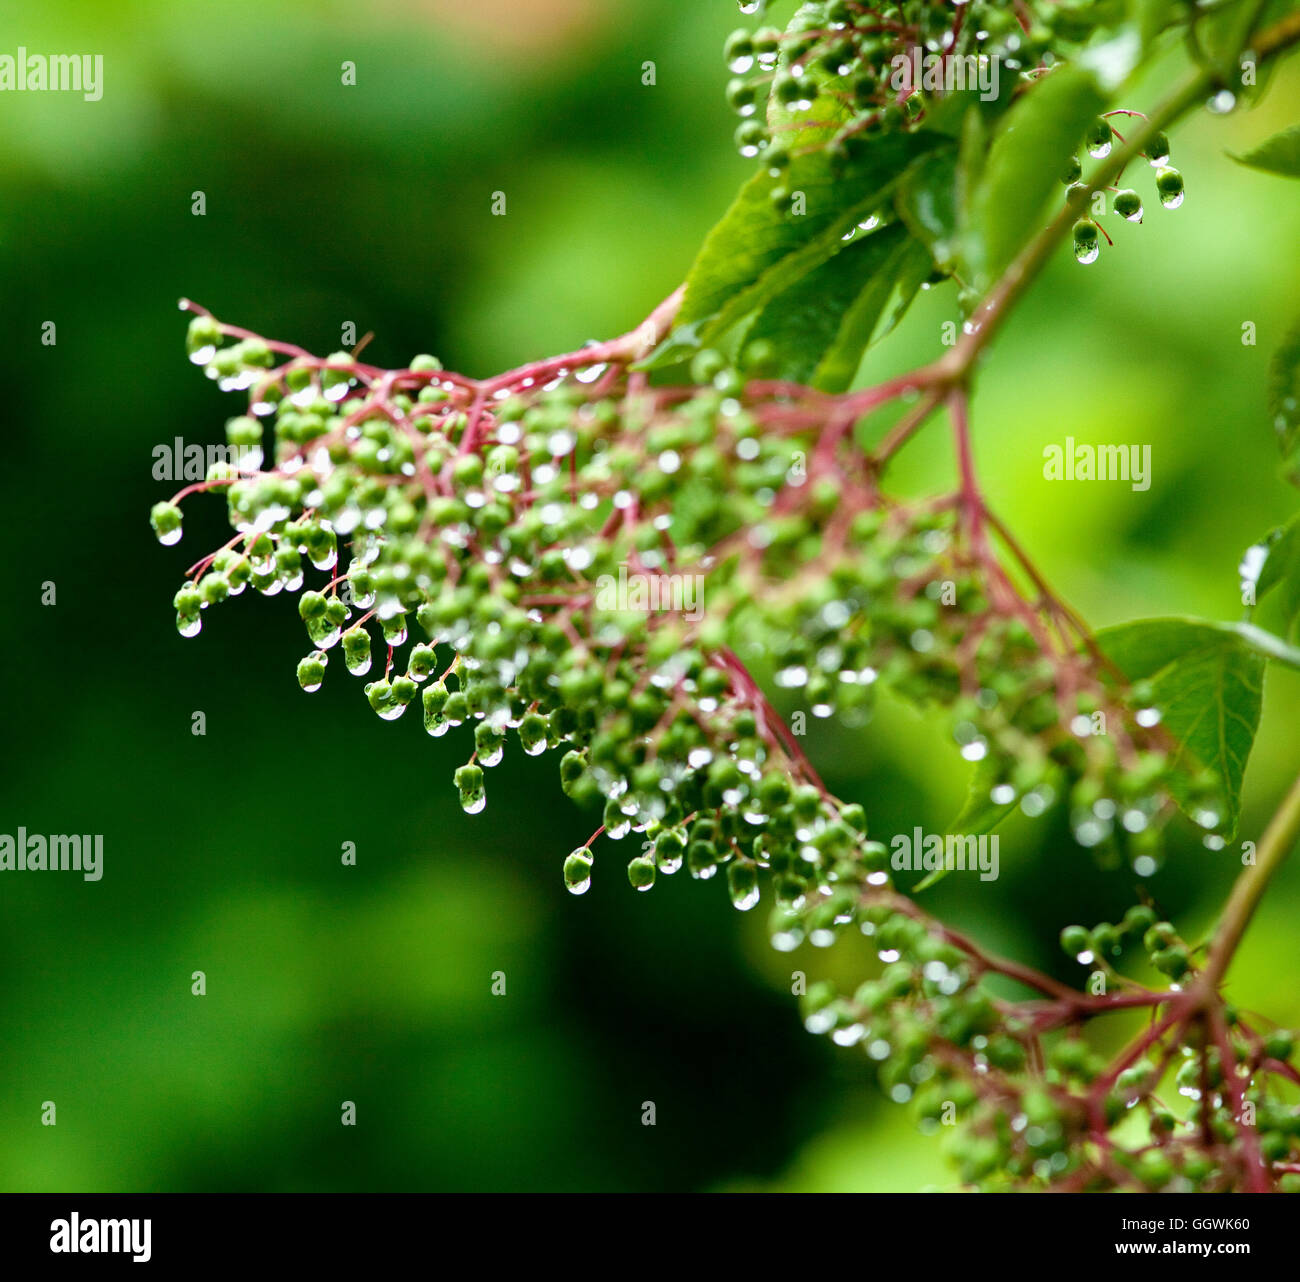 Droplets of Water on Plant after Rain in the Garden Stock Photo